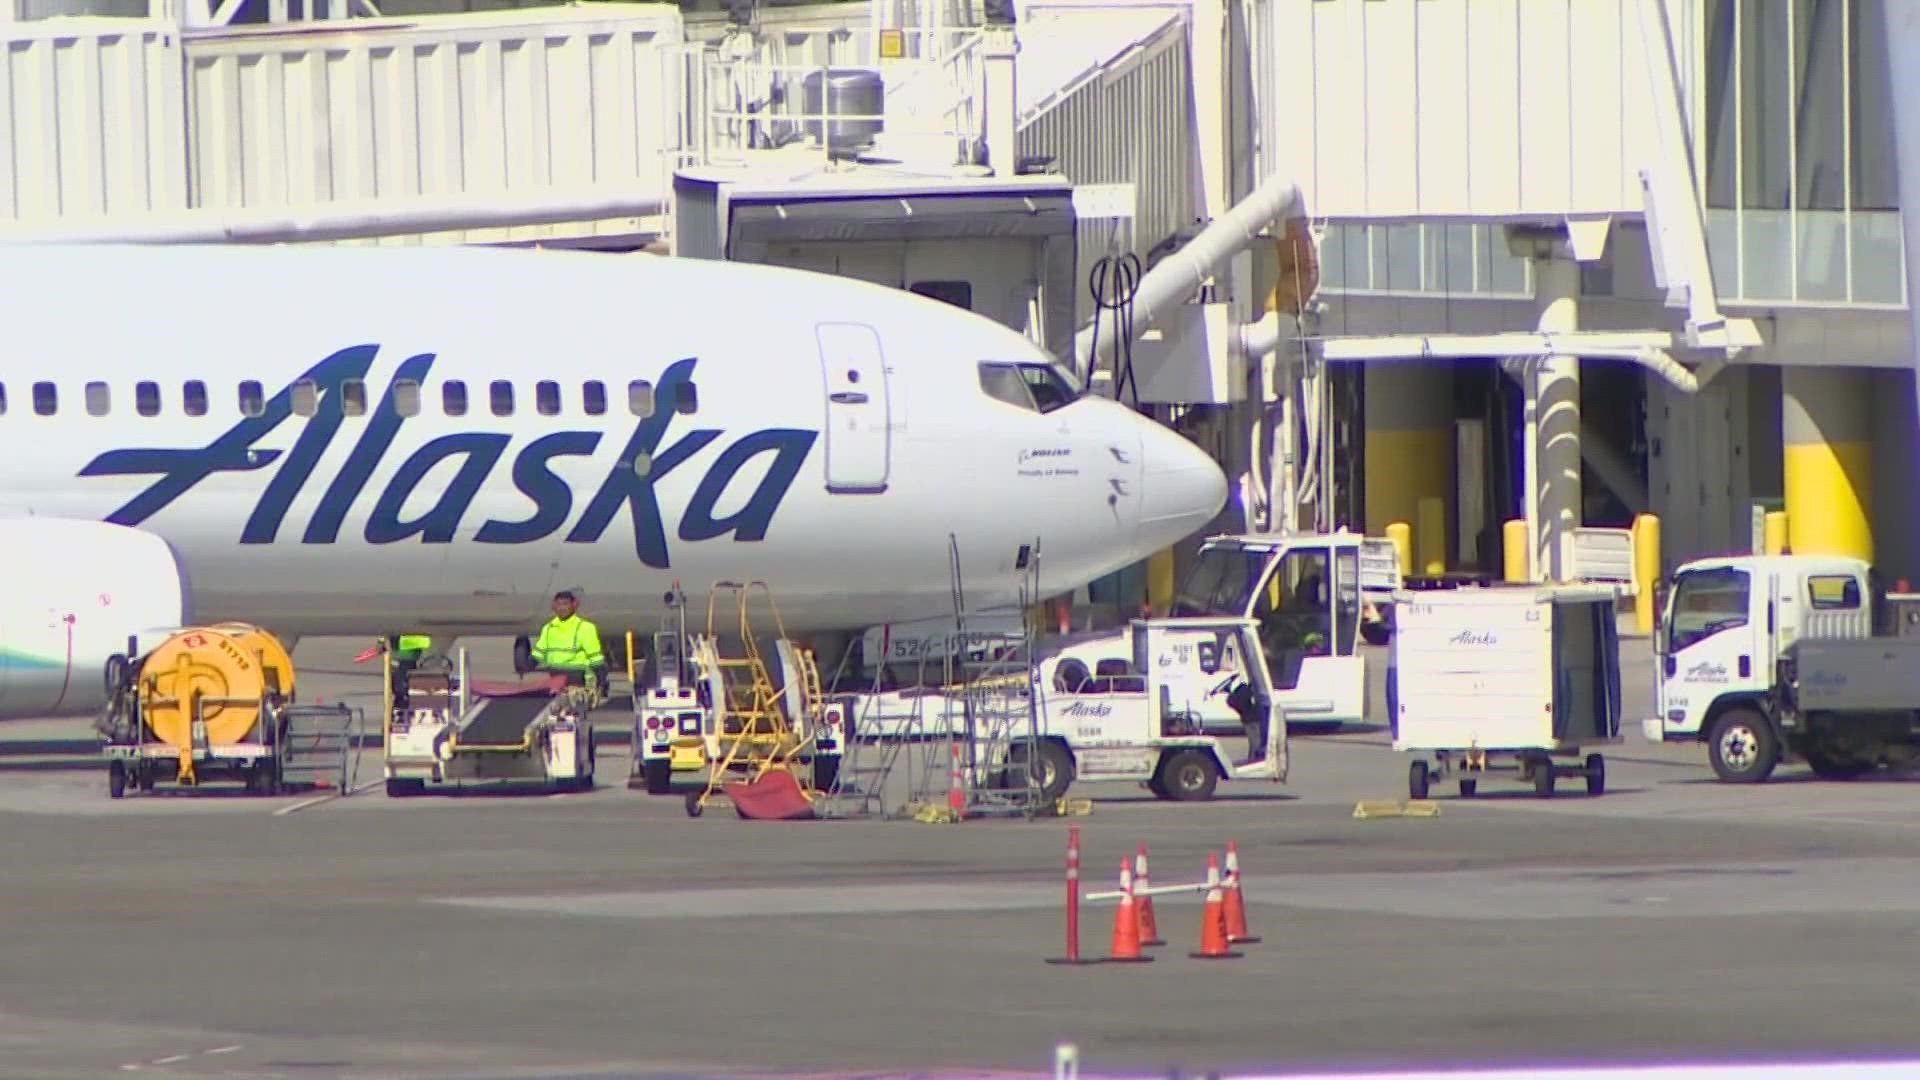 Alaska Airlines pilots are set to begin voting on a strike, with the ballot opening Monday and closing on May 25.